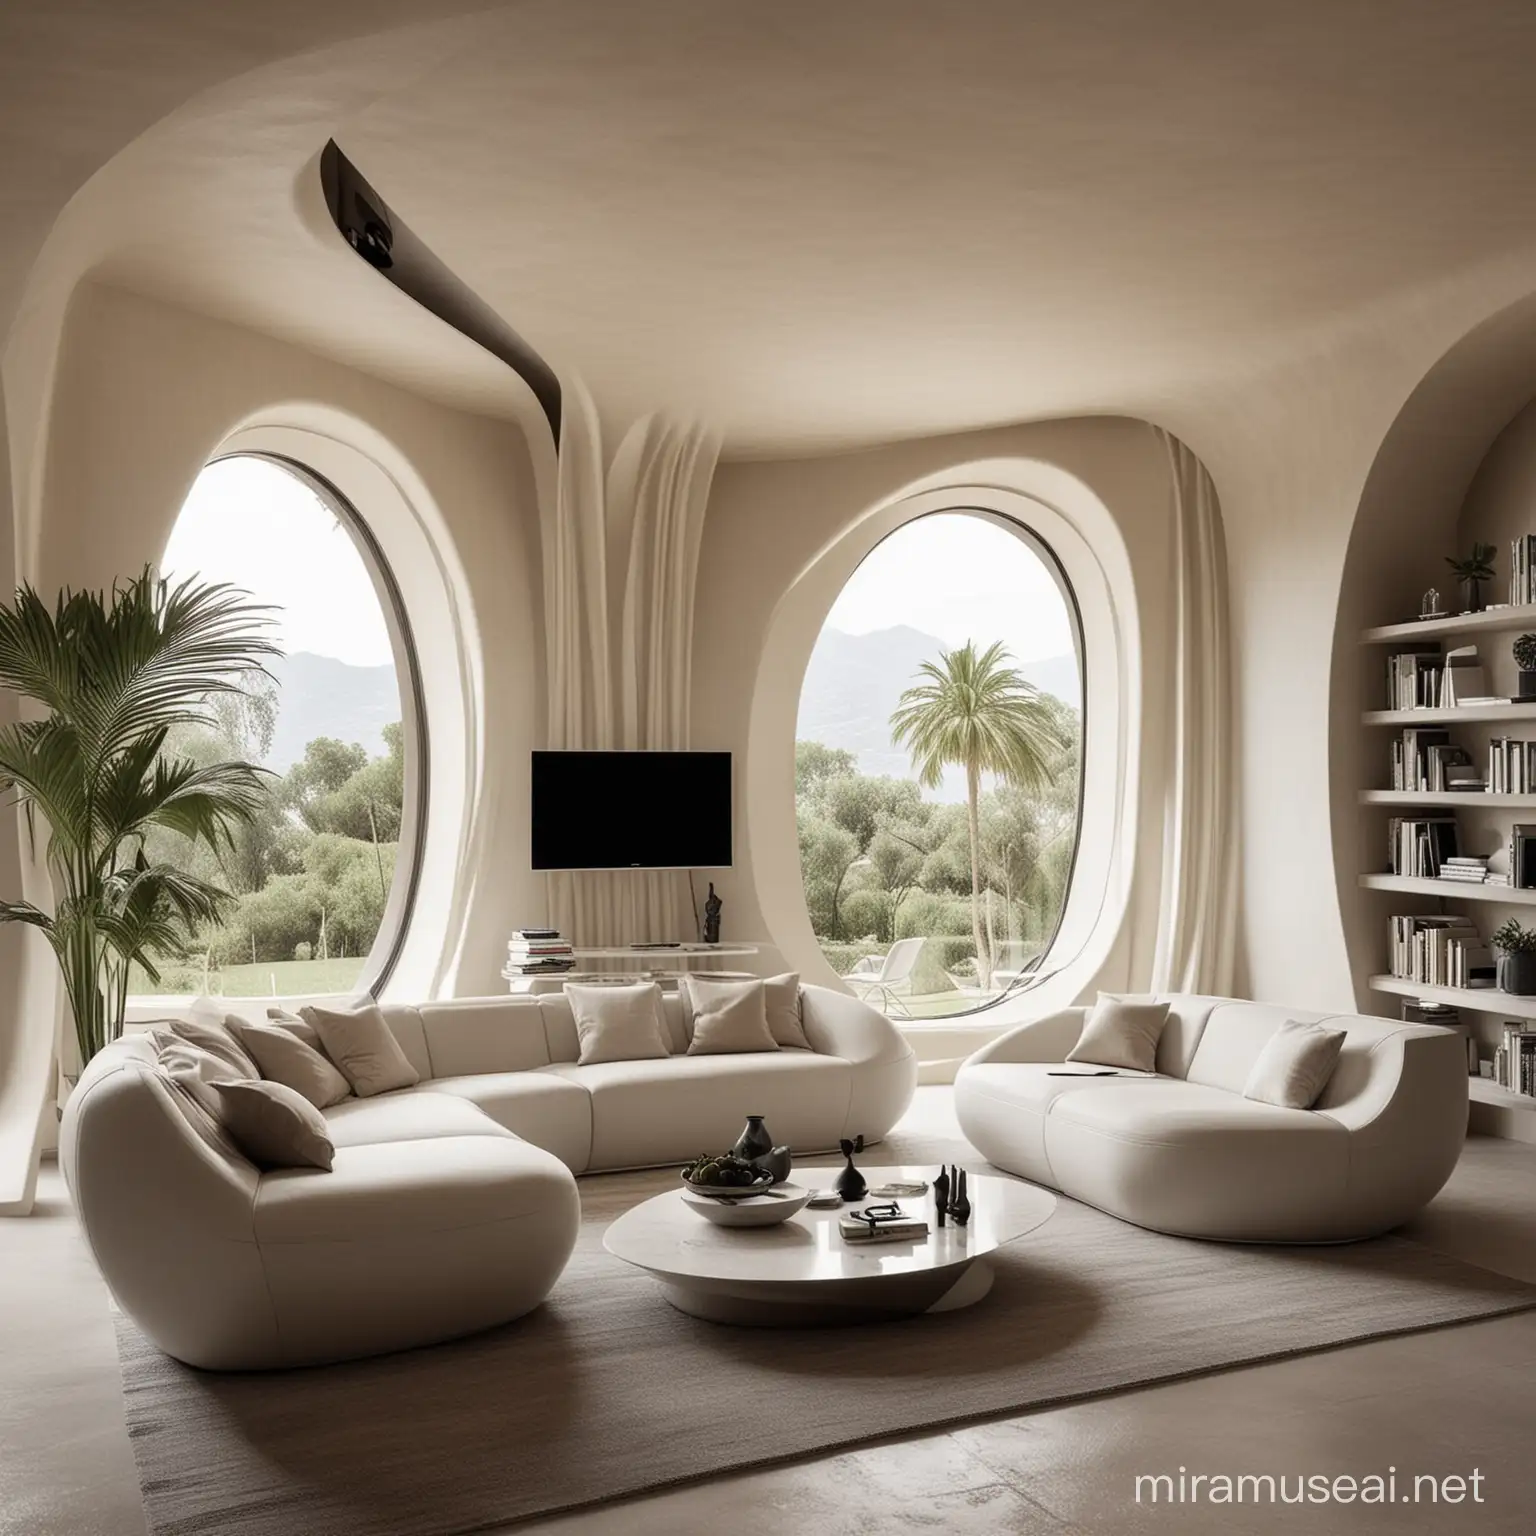 a tropical Sicily living room#influenced by the works of Zaha Hadid#Newcollection#architecturetravel #architecturebuilding#newstyl#tredy#livingroom#interiordesign#aiprompts#archdaily#aiinteriordesign#decoration#interiordesignerslife#interiordesignersofinstagram#interiordesignblogger#architecture_best#interiordesignlover#digitalart#furniture#homedecor#productdesign#interiordesigninspiration#finearchitecture#architectureape#rendertrends#renderarchitecture#setdesign#visual#visualart#interiordesignaddict#midjourney